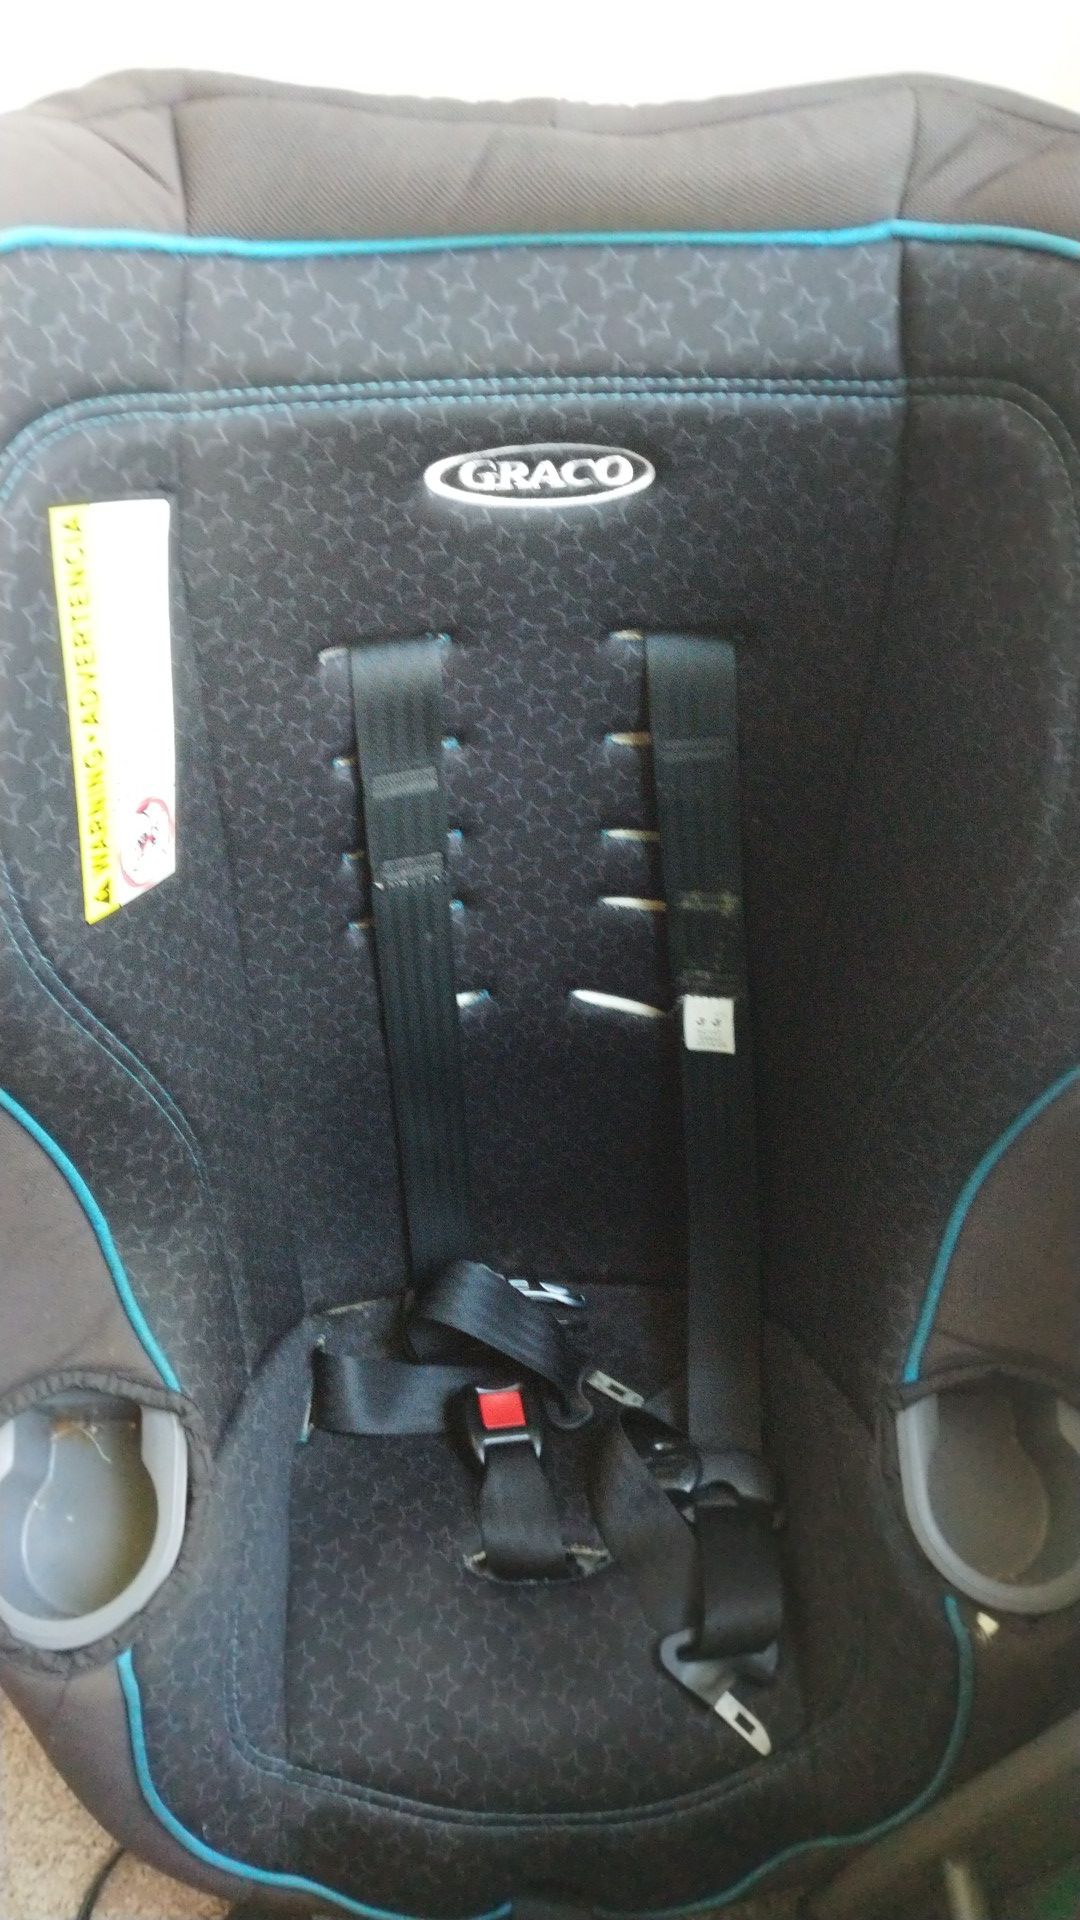 Graco baby car seat for 5 -40 lb kids/babies